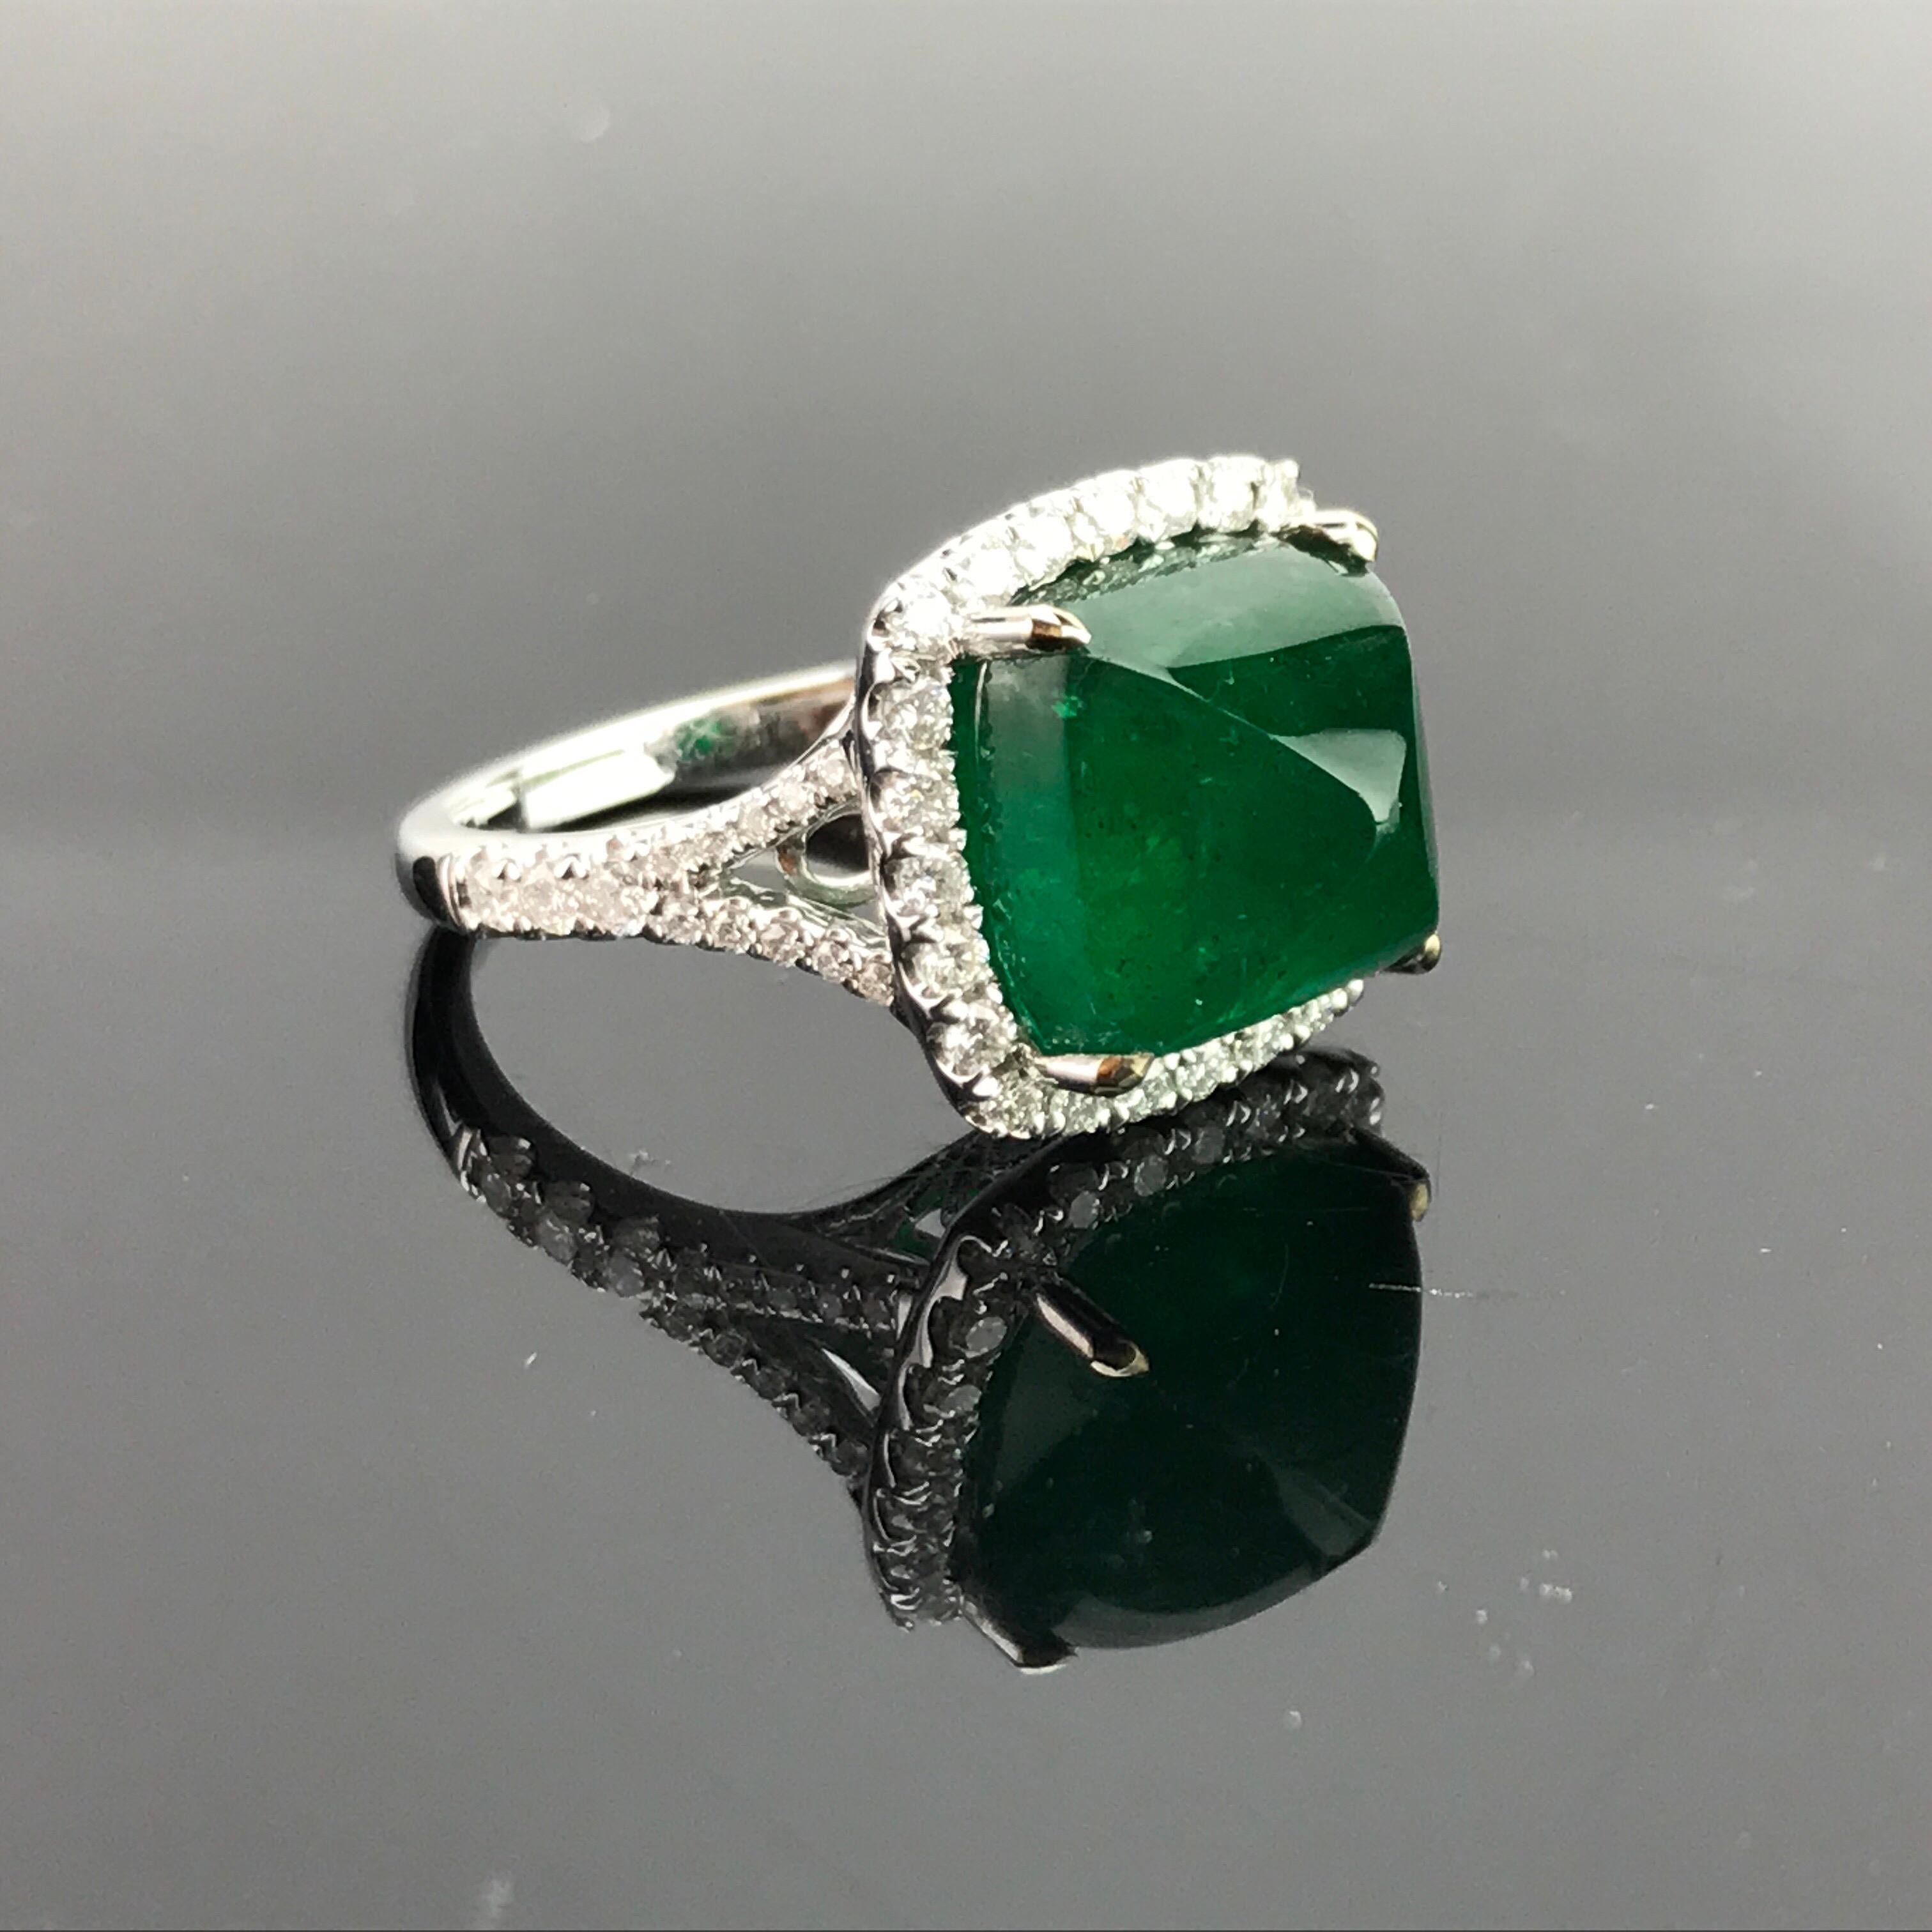 A one of a kind, 8.54 carat deep-green Emerald sugarloaf sorrounded with a White Diamond halo, all set in a 18K white gold band.

Stone Details: 
Stone: Zambian Emerald
Cut: Sugarloaf
Carat Weight: 8.54

Diamond Details:
Cut: Brilliant
Total Carat